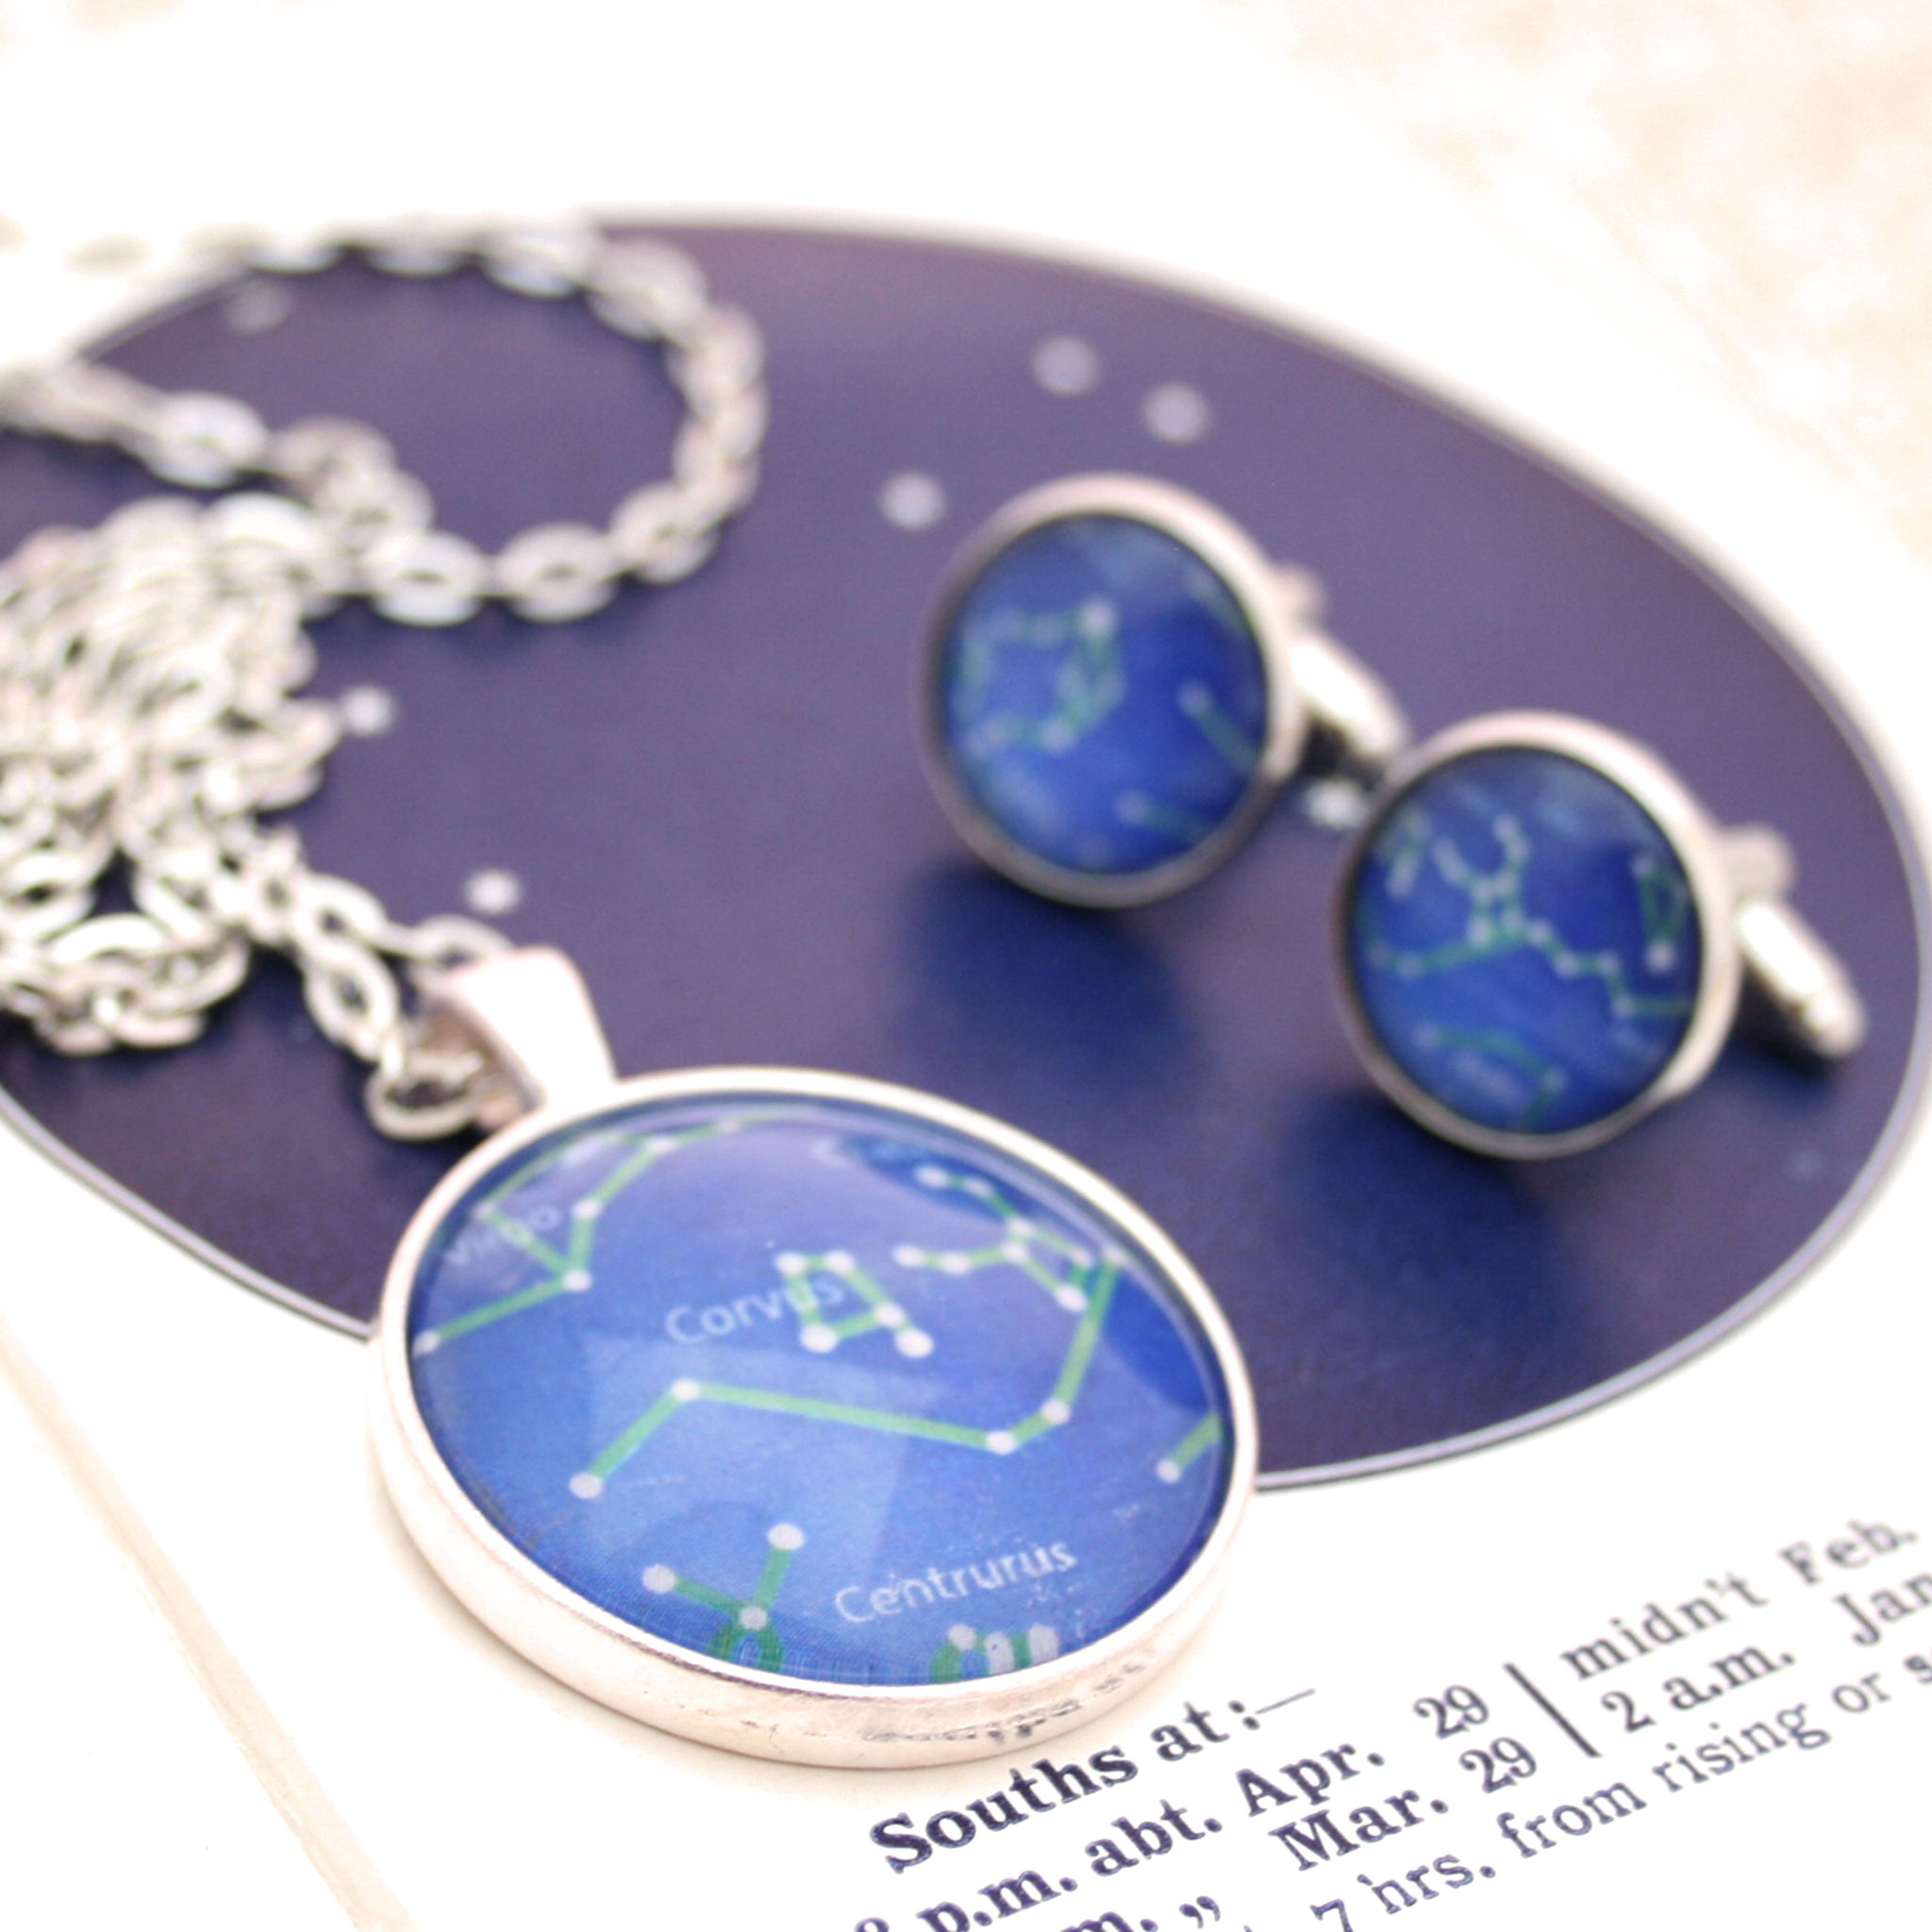 bespoke celestial necklace with map of heaven from given date and place